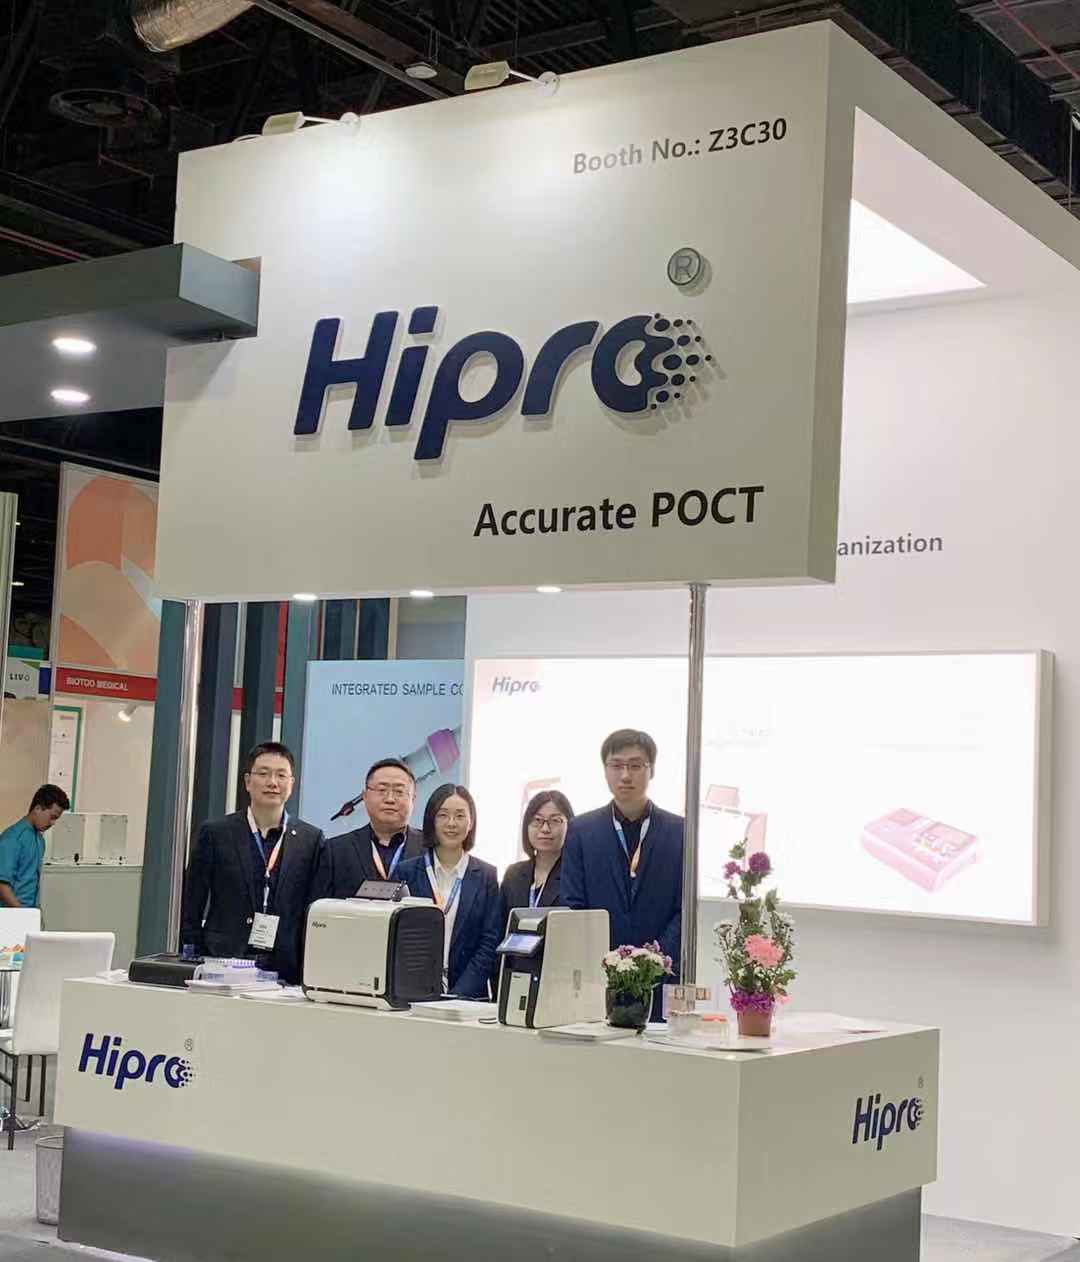 Hipro first show in 2020 Medlab Dubai